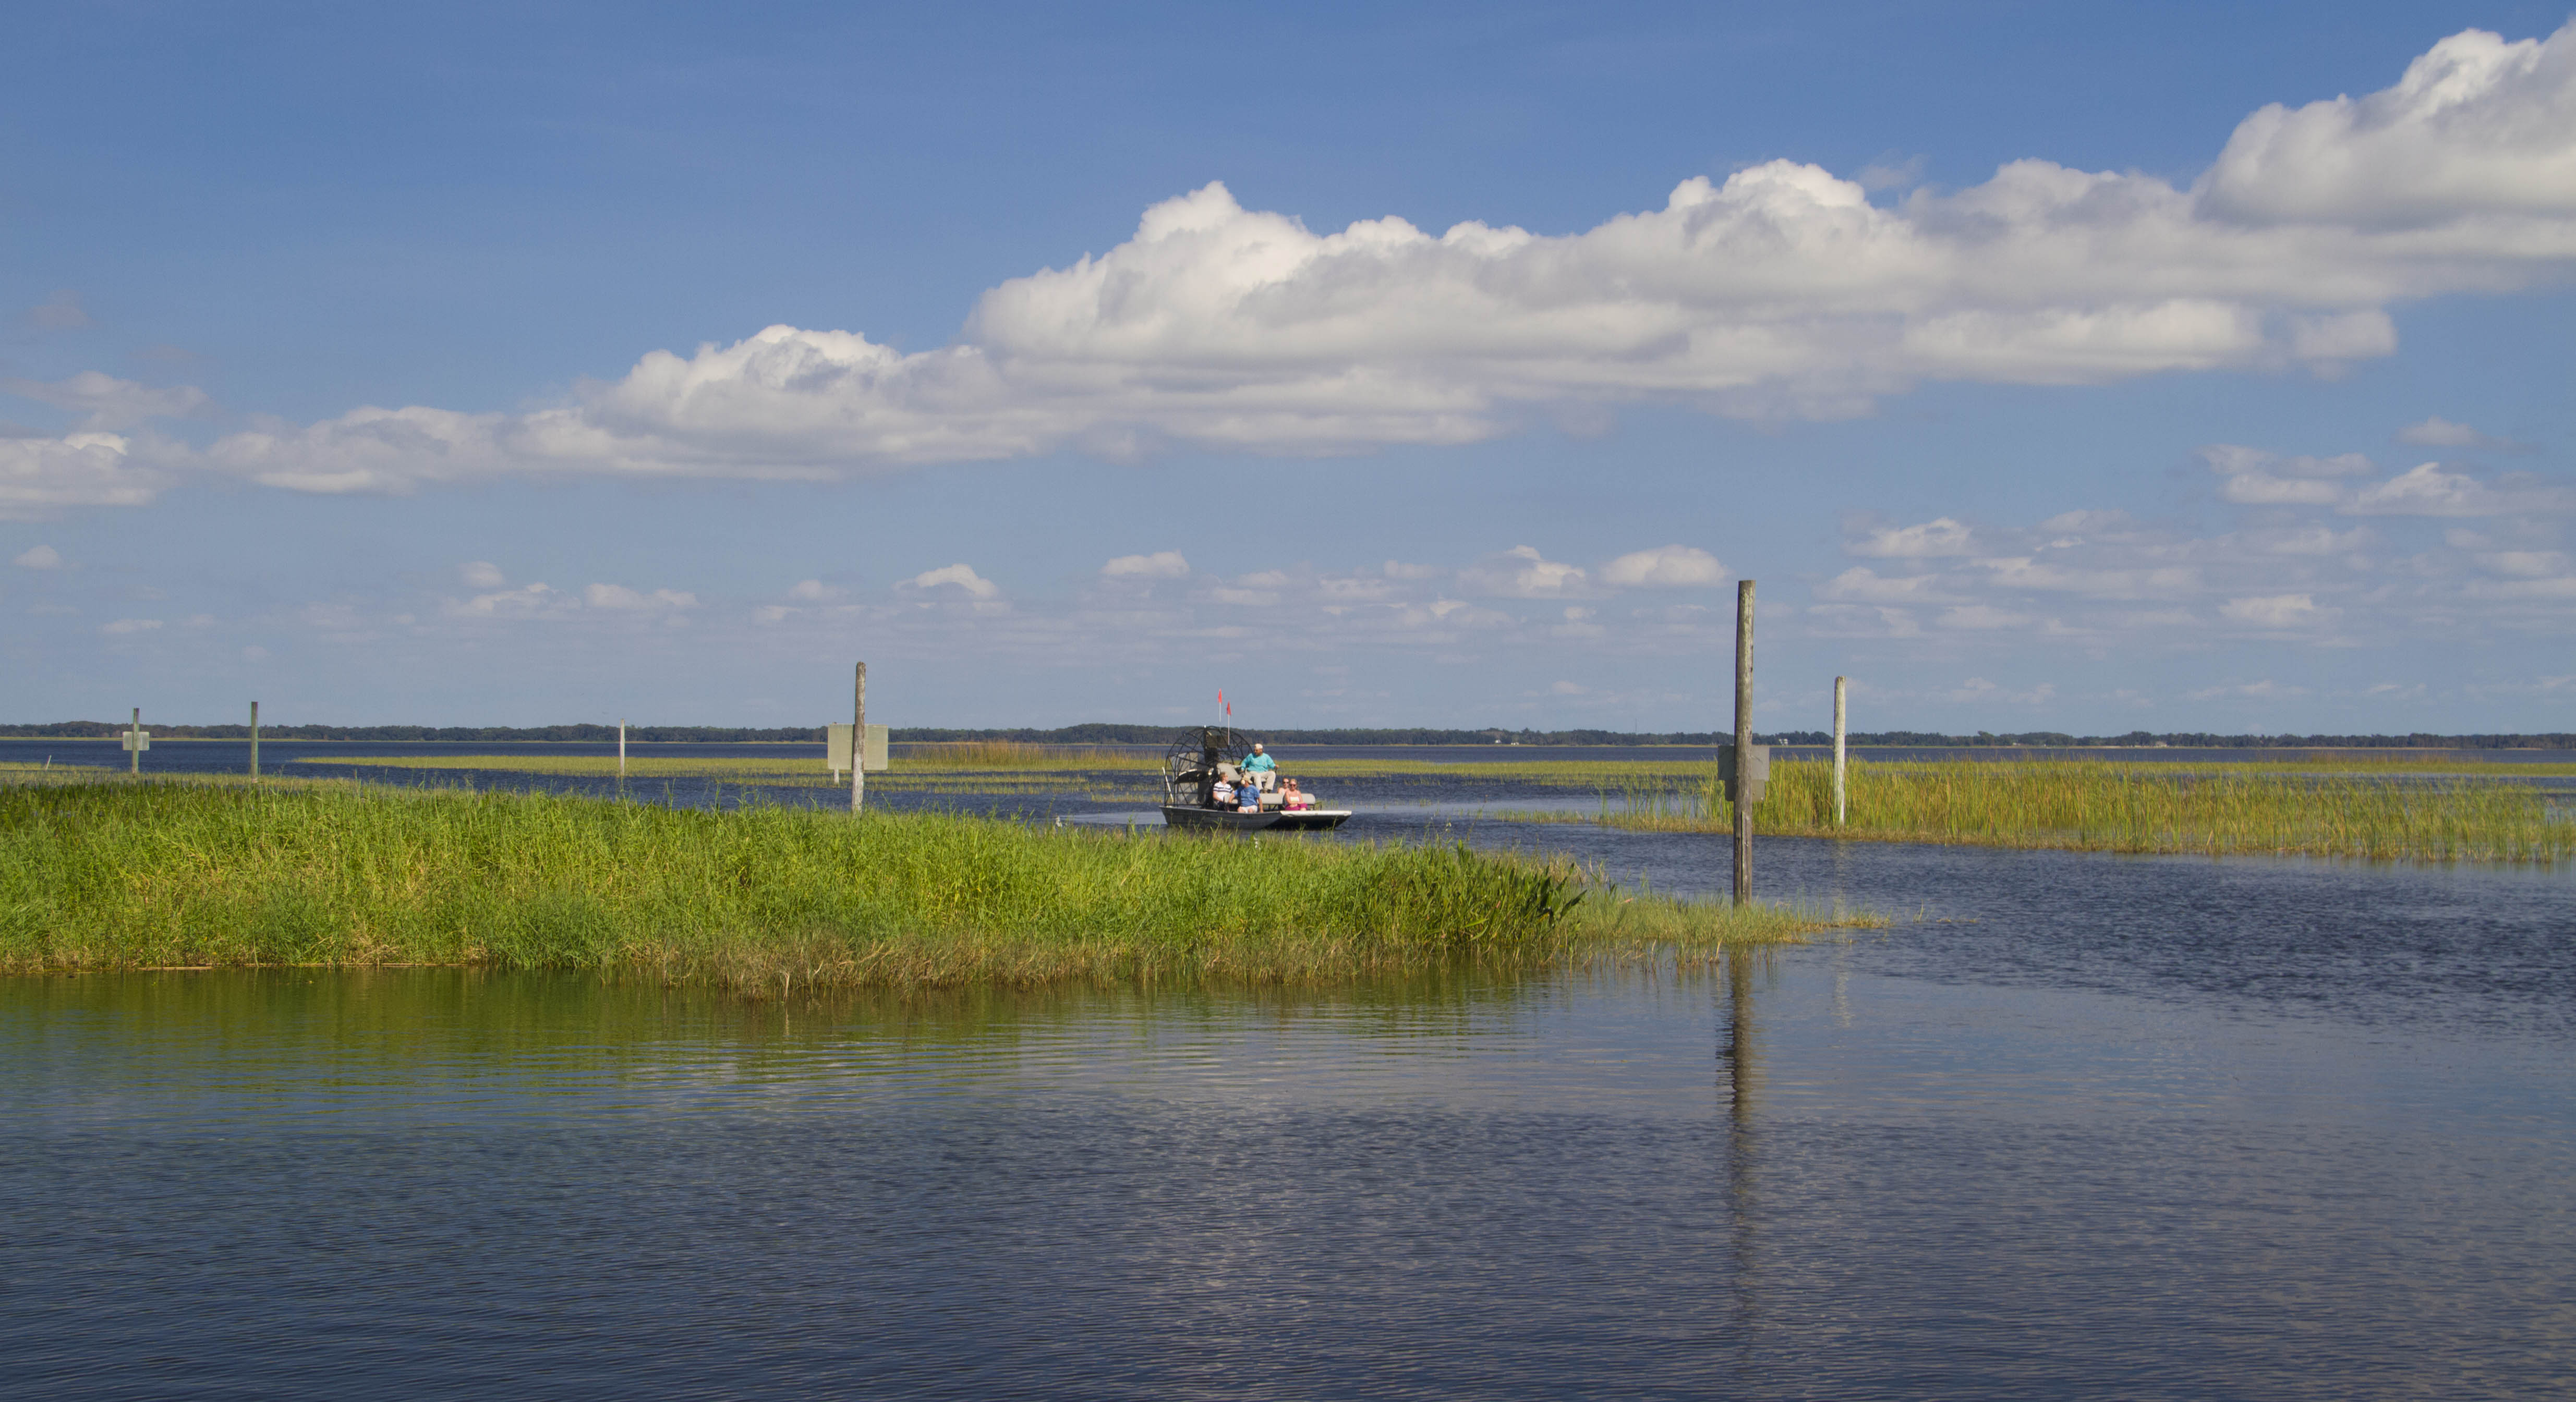 Boggy Creek Airboat Ride